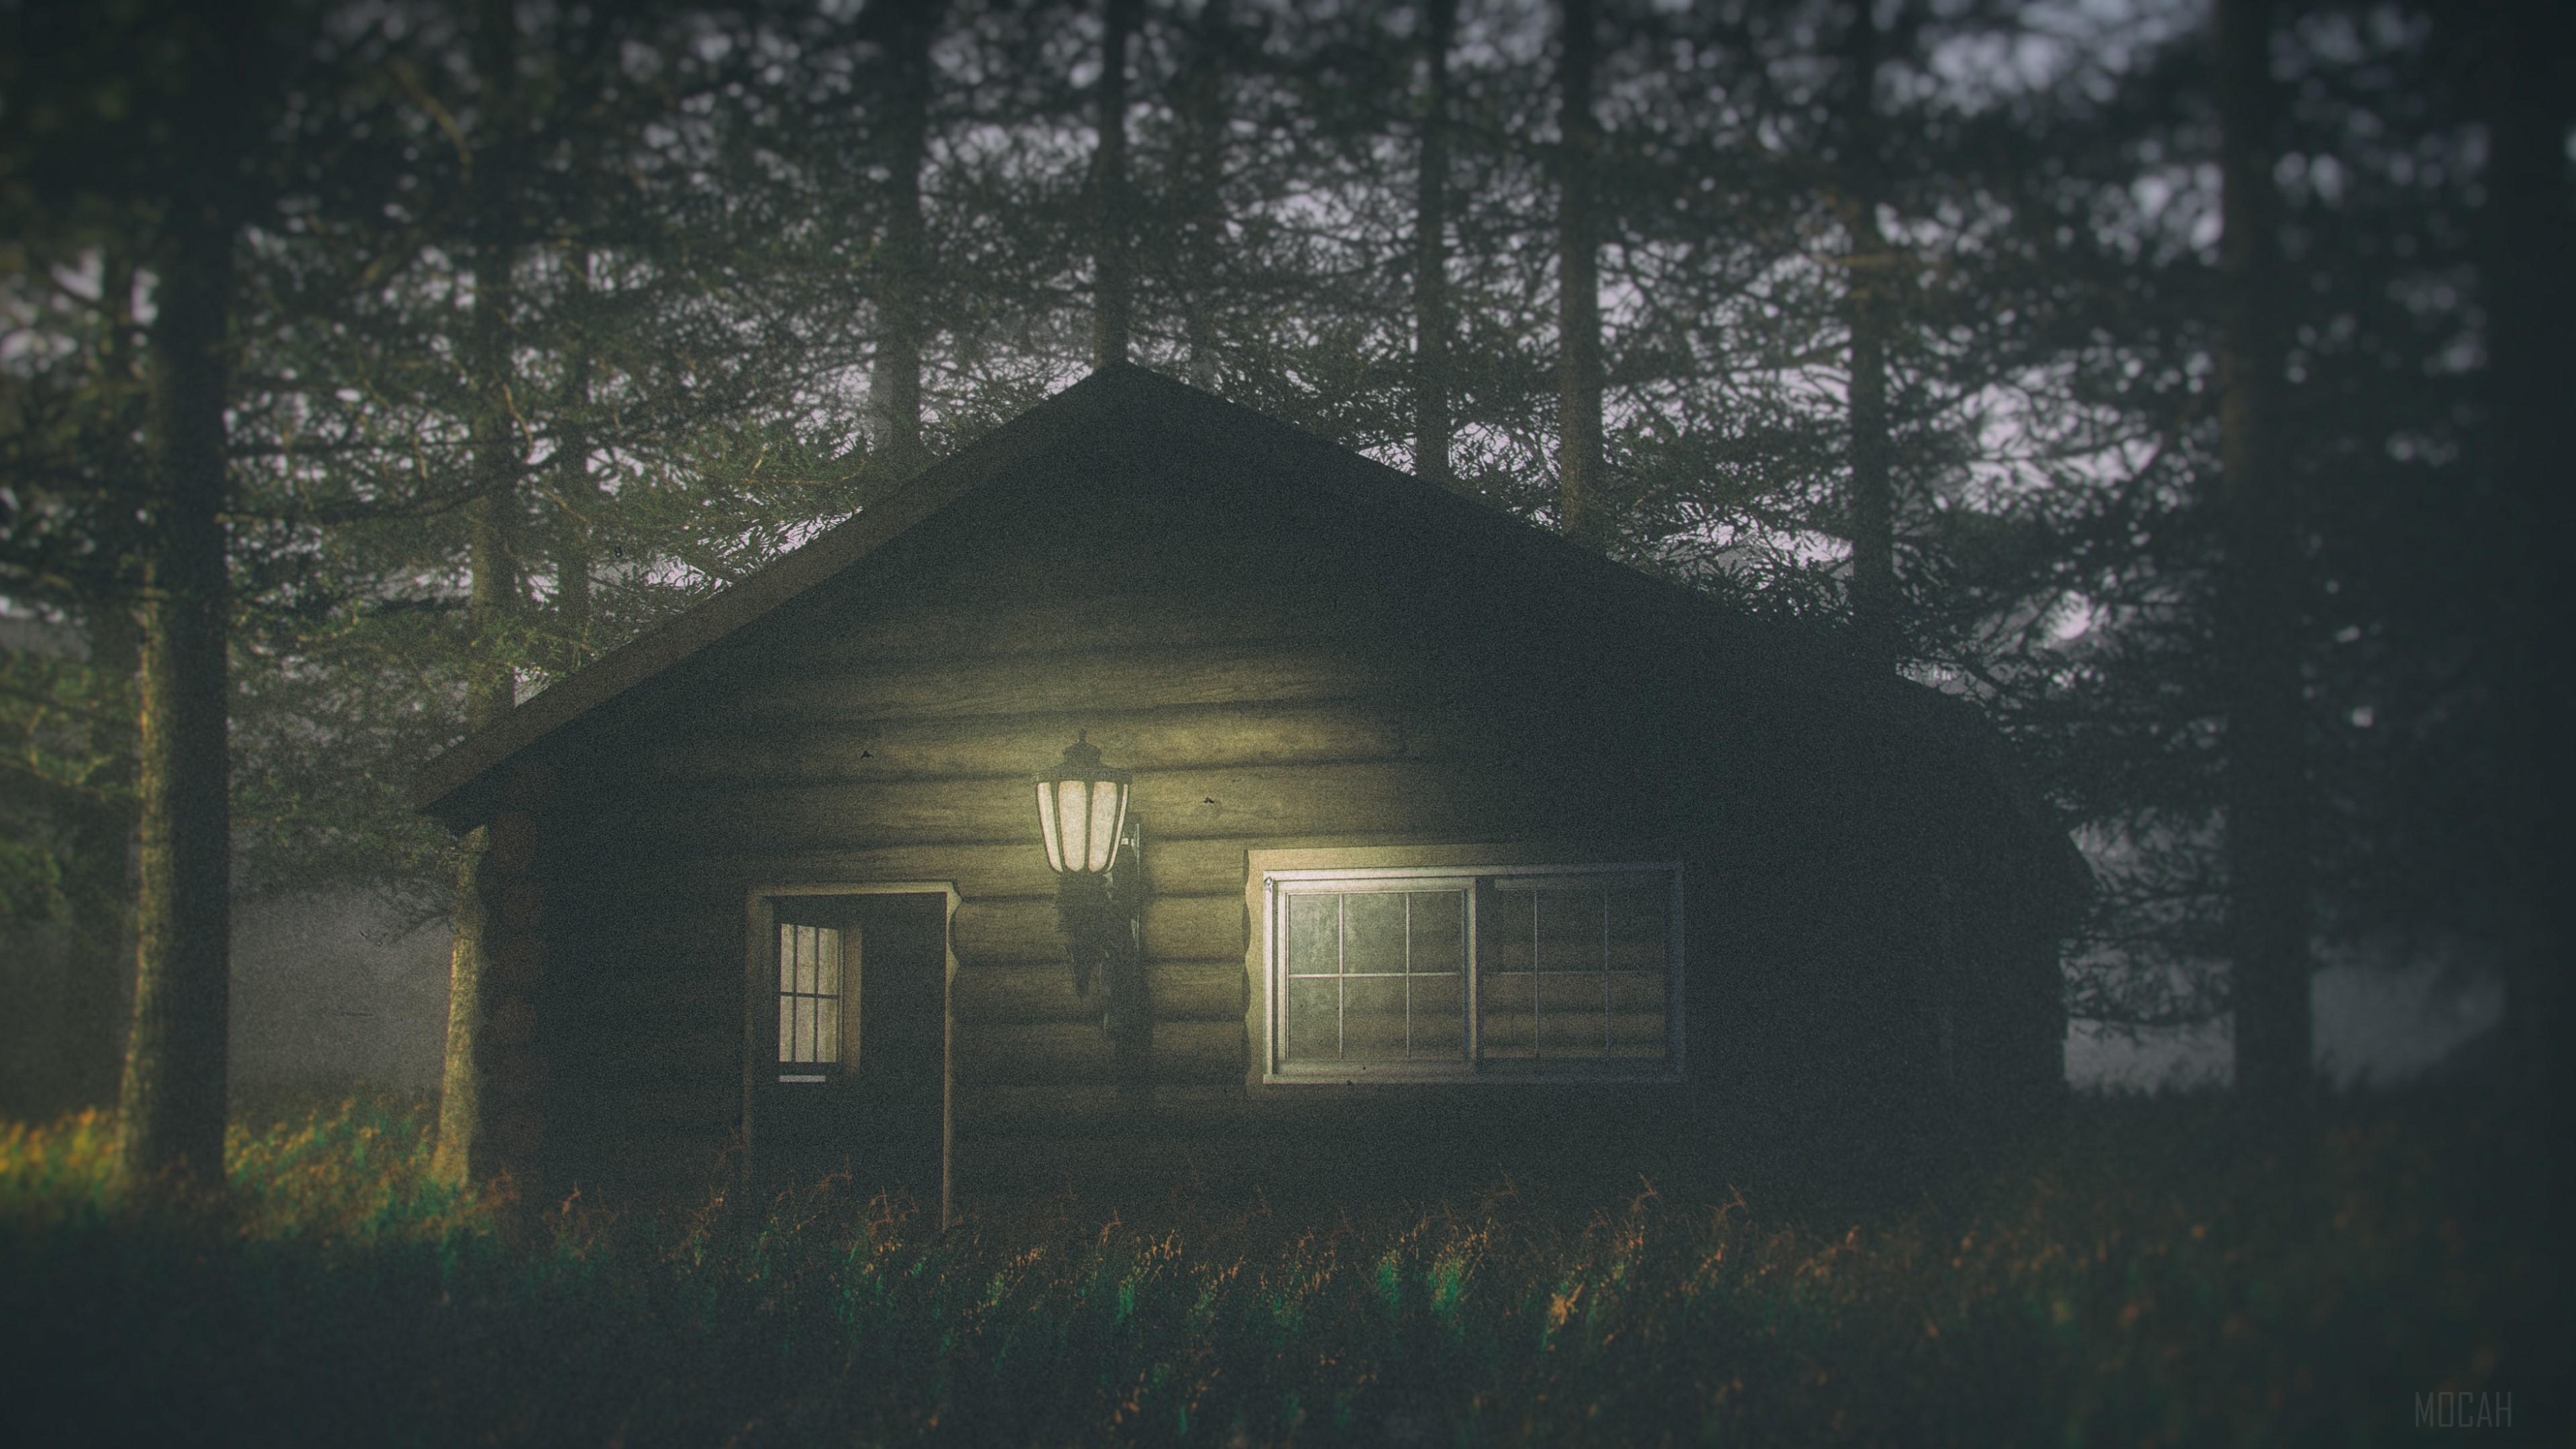 HD wallpaper, House In Forest Darkness 4K